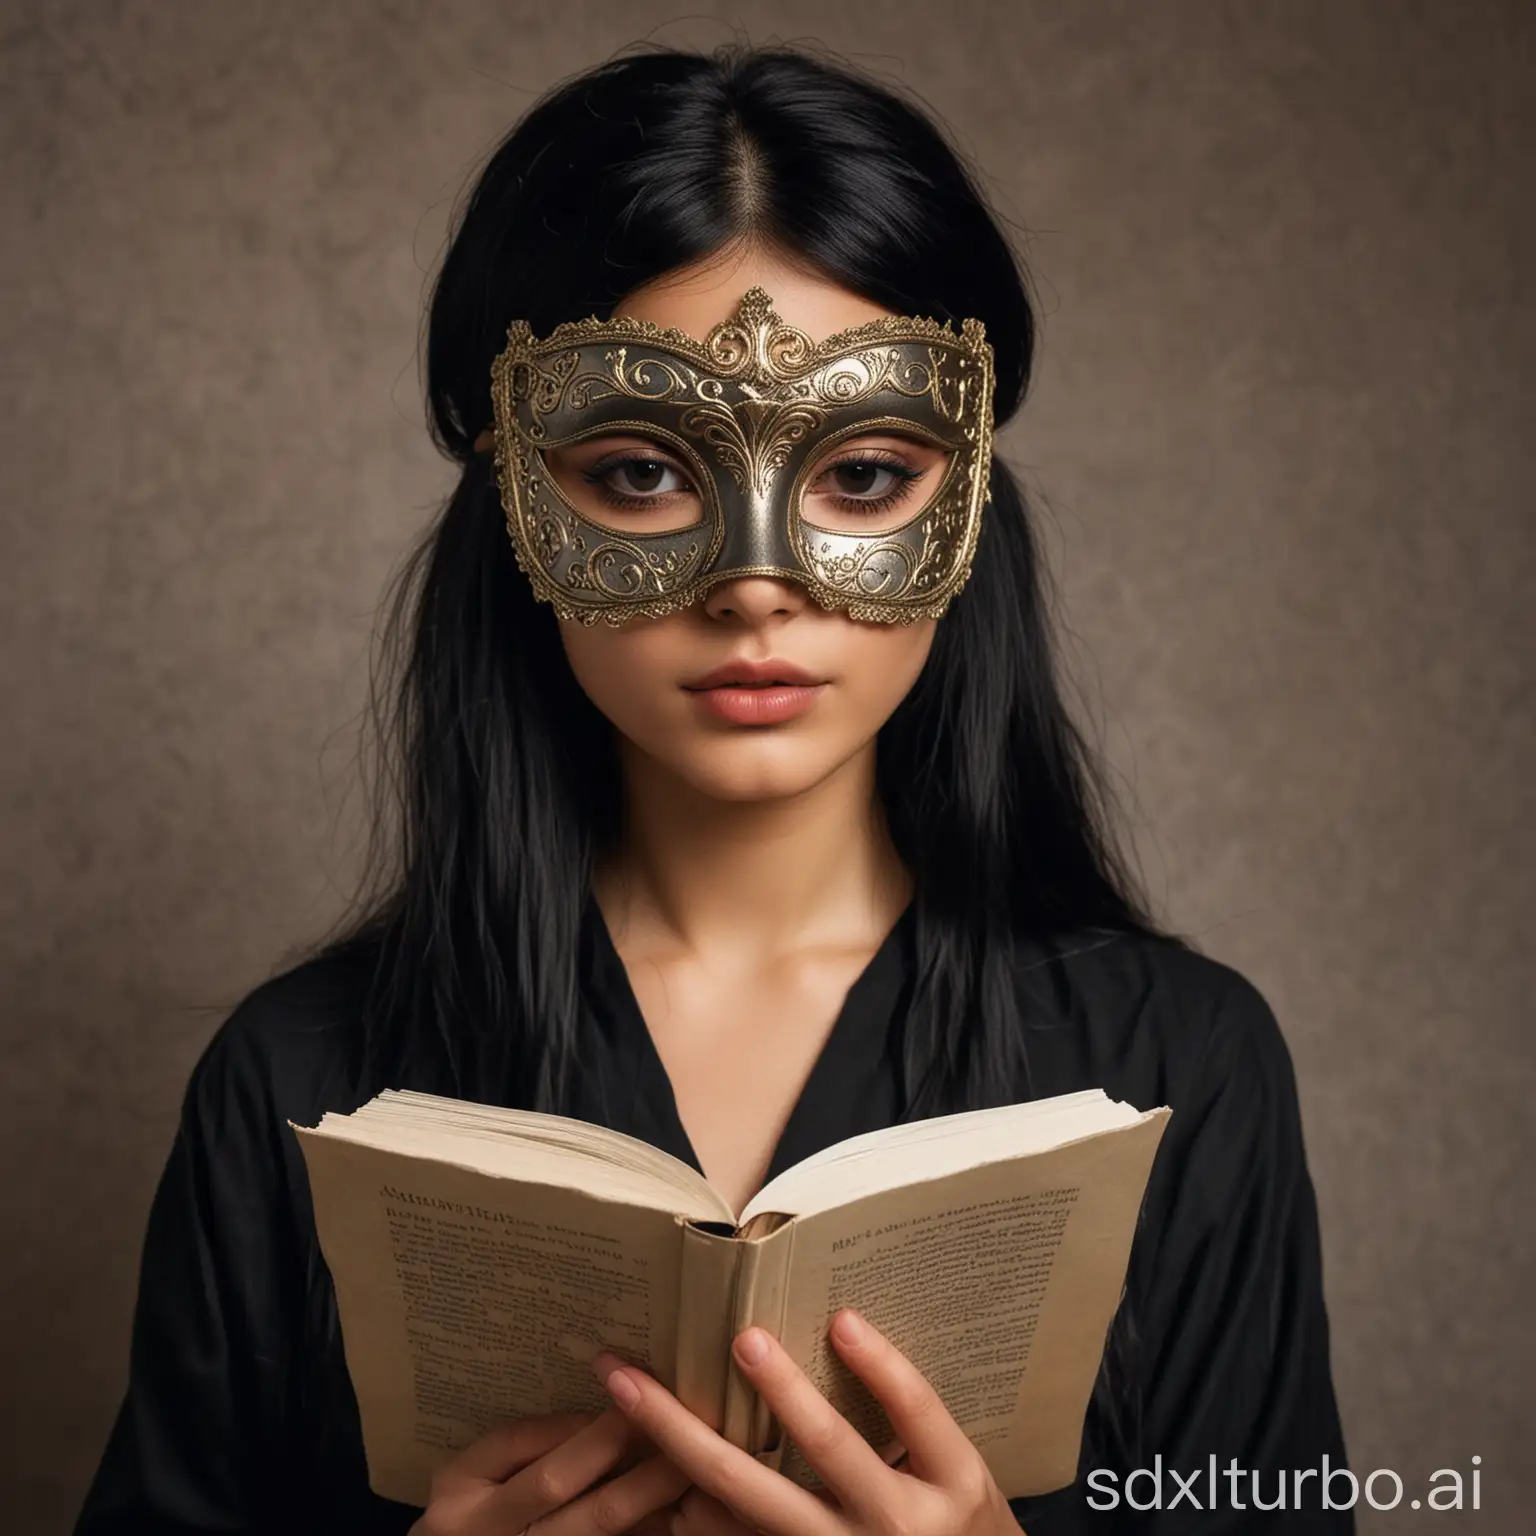 persian black hair young woman with a masquerade mask covering her face reading a philosophy book